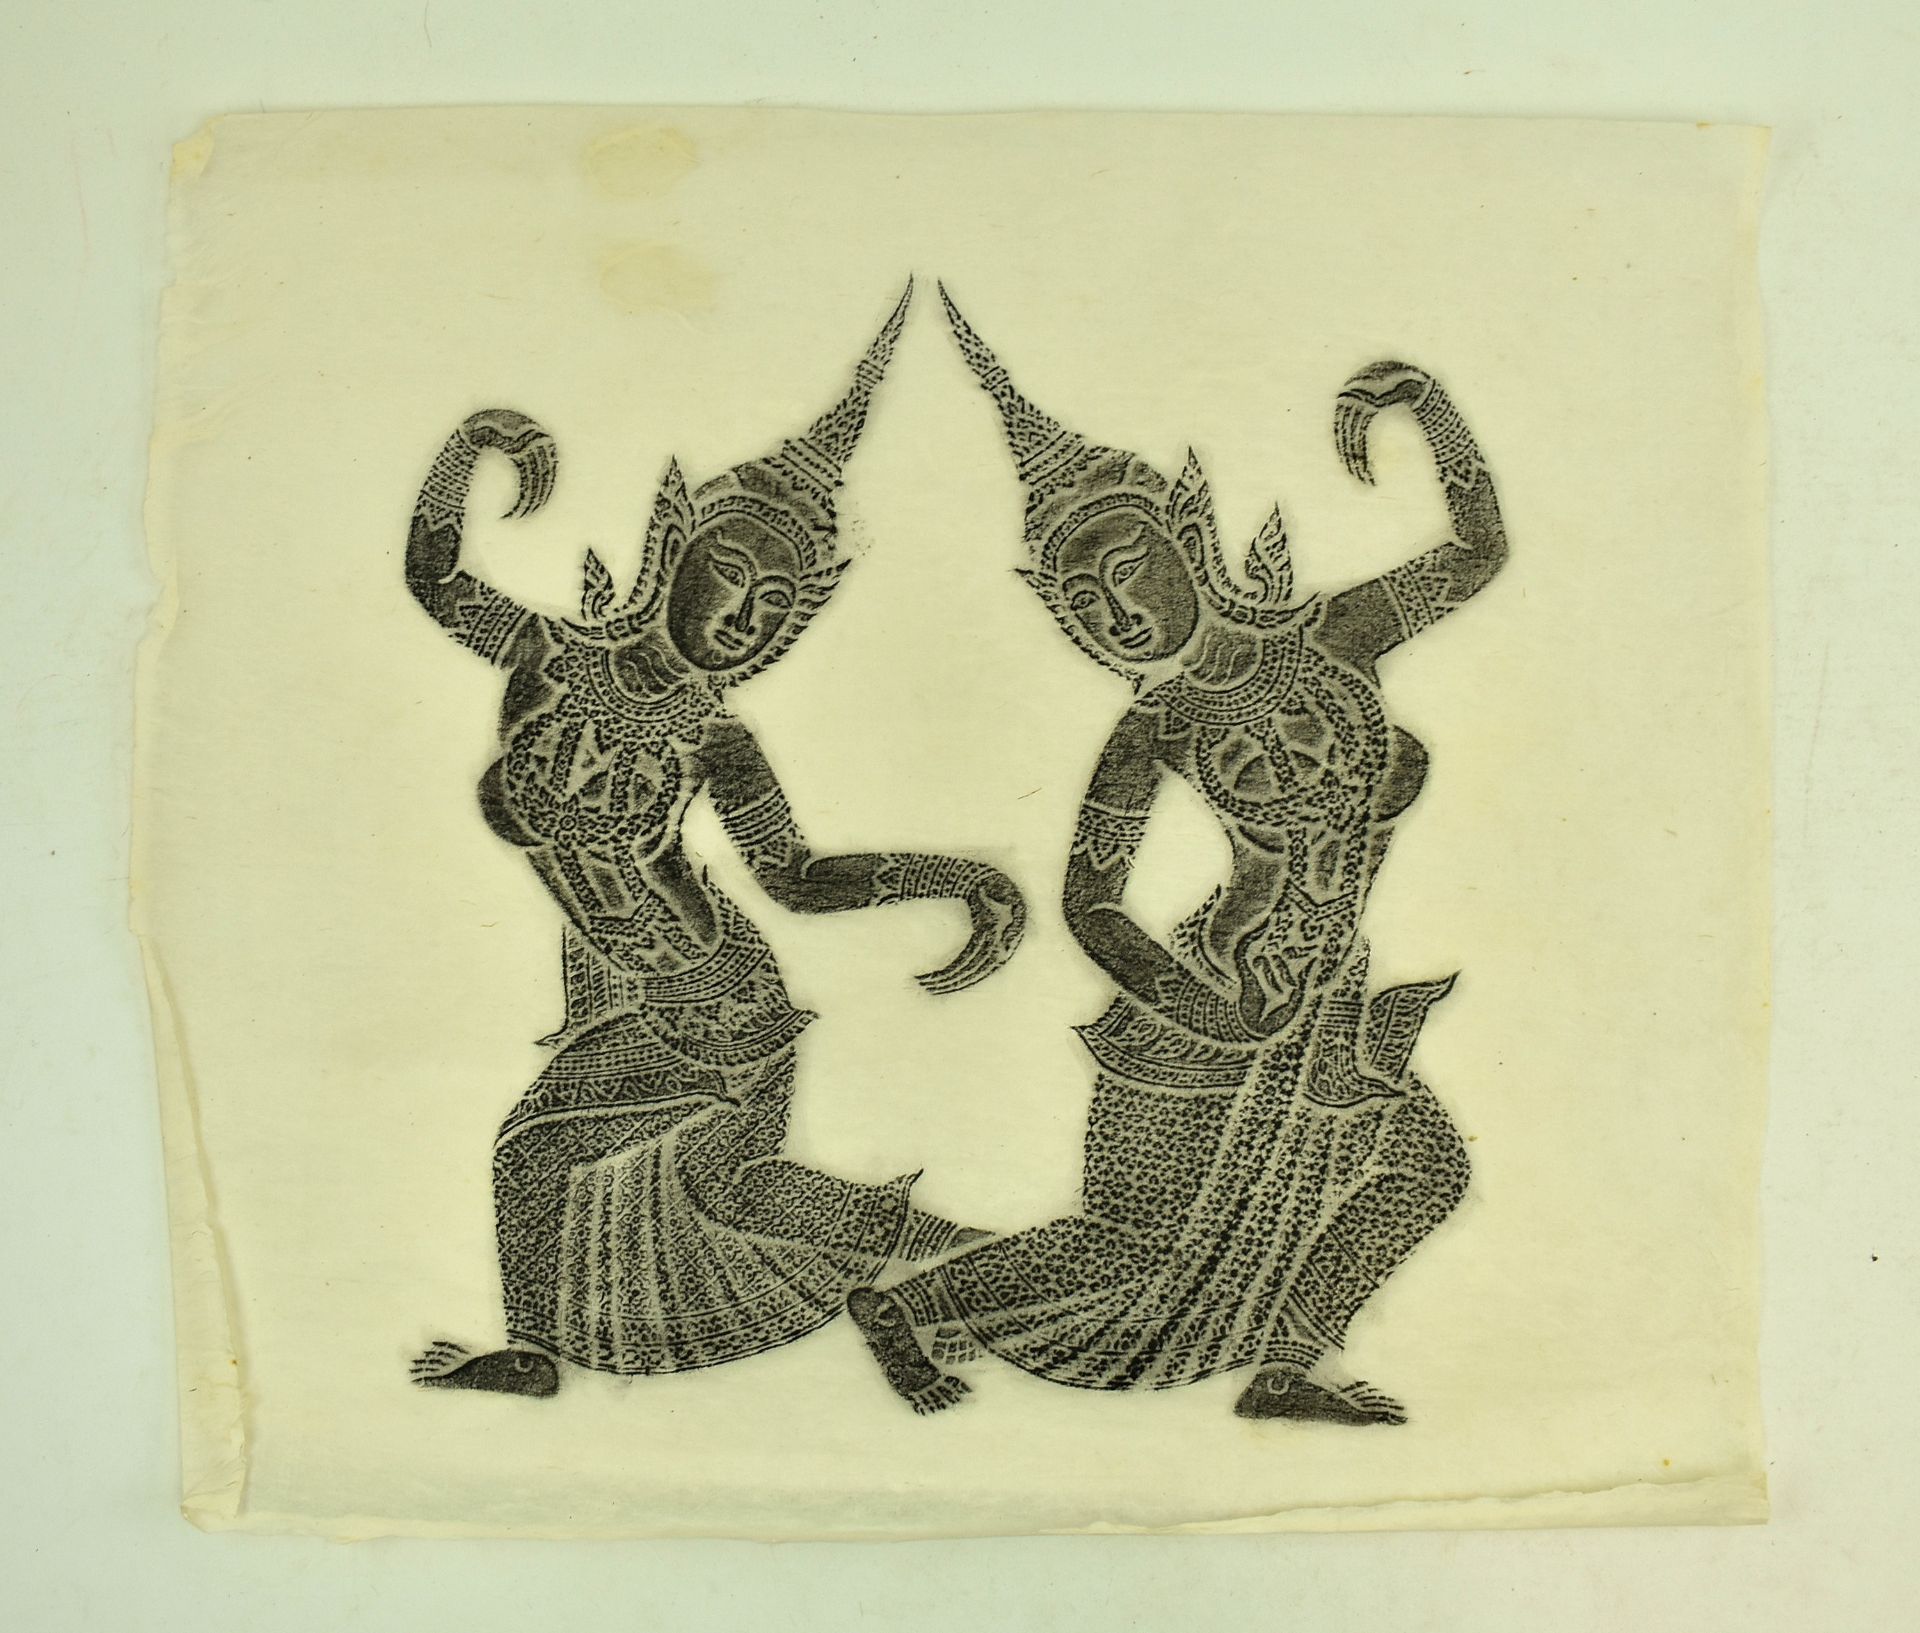 GROUP OF THREE THAI CHARCOAL RUBBING OF DANCERS & MUSICIANS - Image 2 of 3